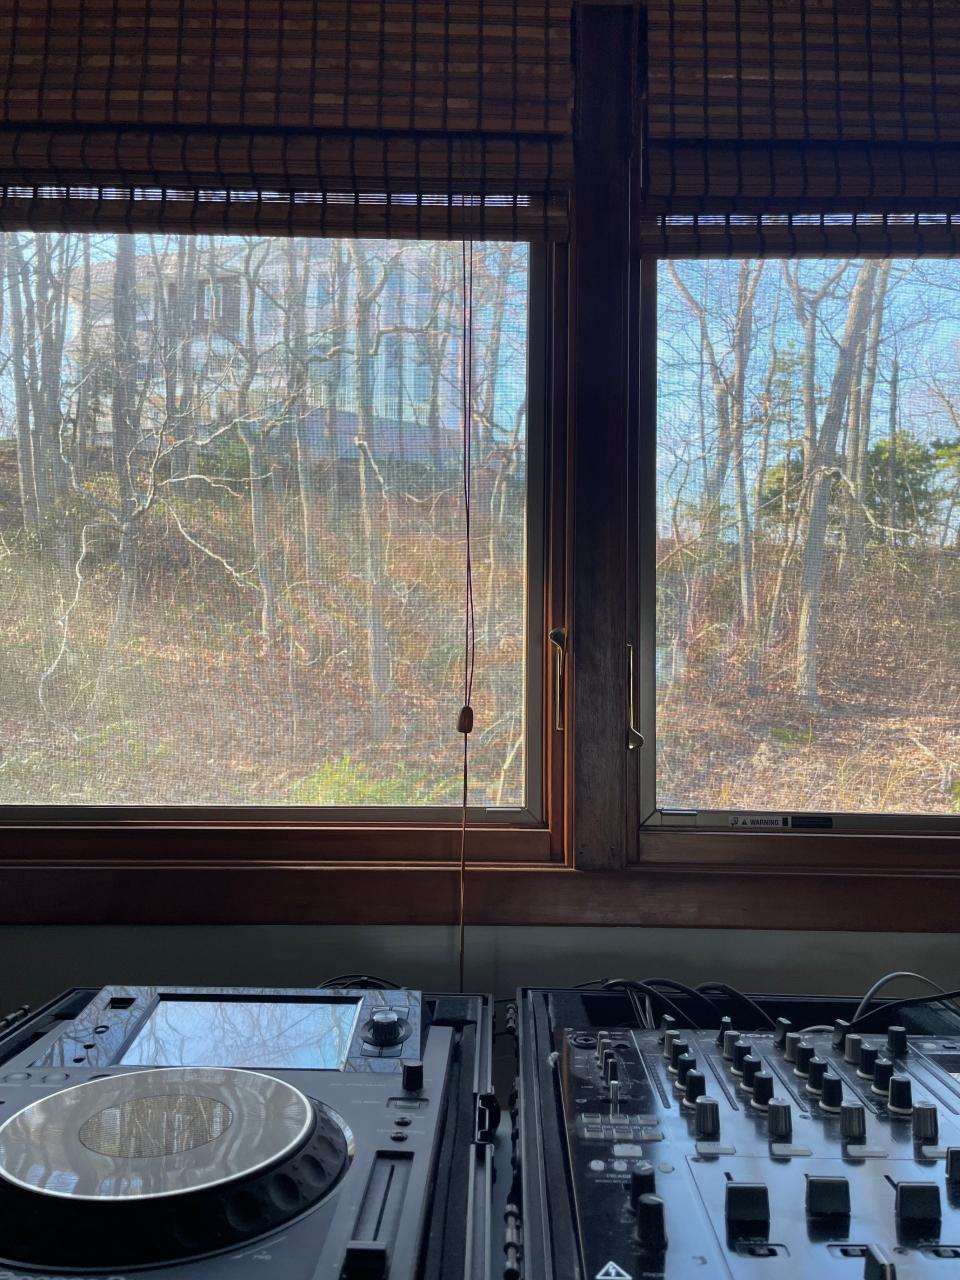 Dan Mueller's view from his second floor looking at Overlook Manor in the Shark River Hills section of Neptune. He used this audio equipment to capture the decibel output from the nearby parties.